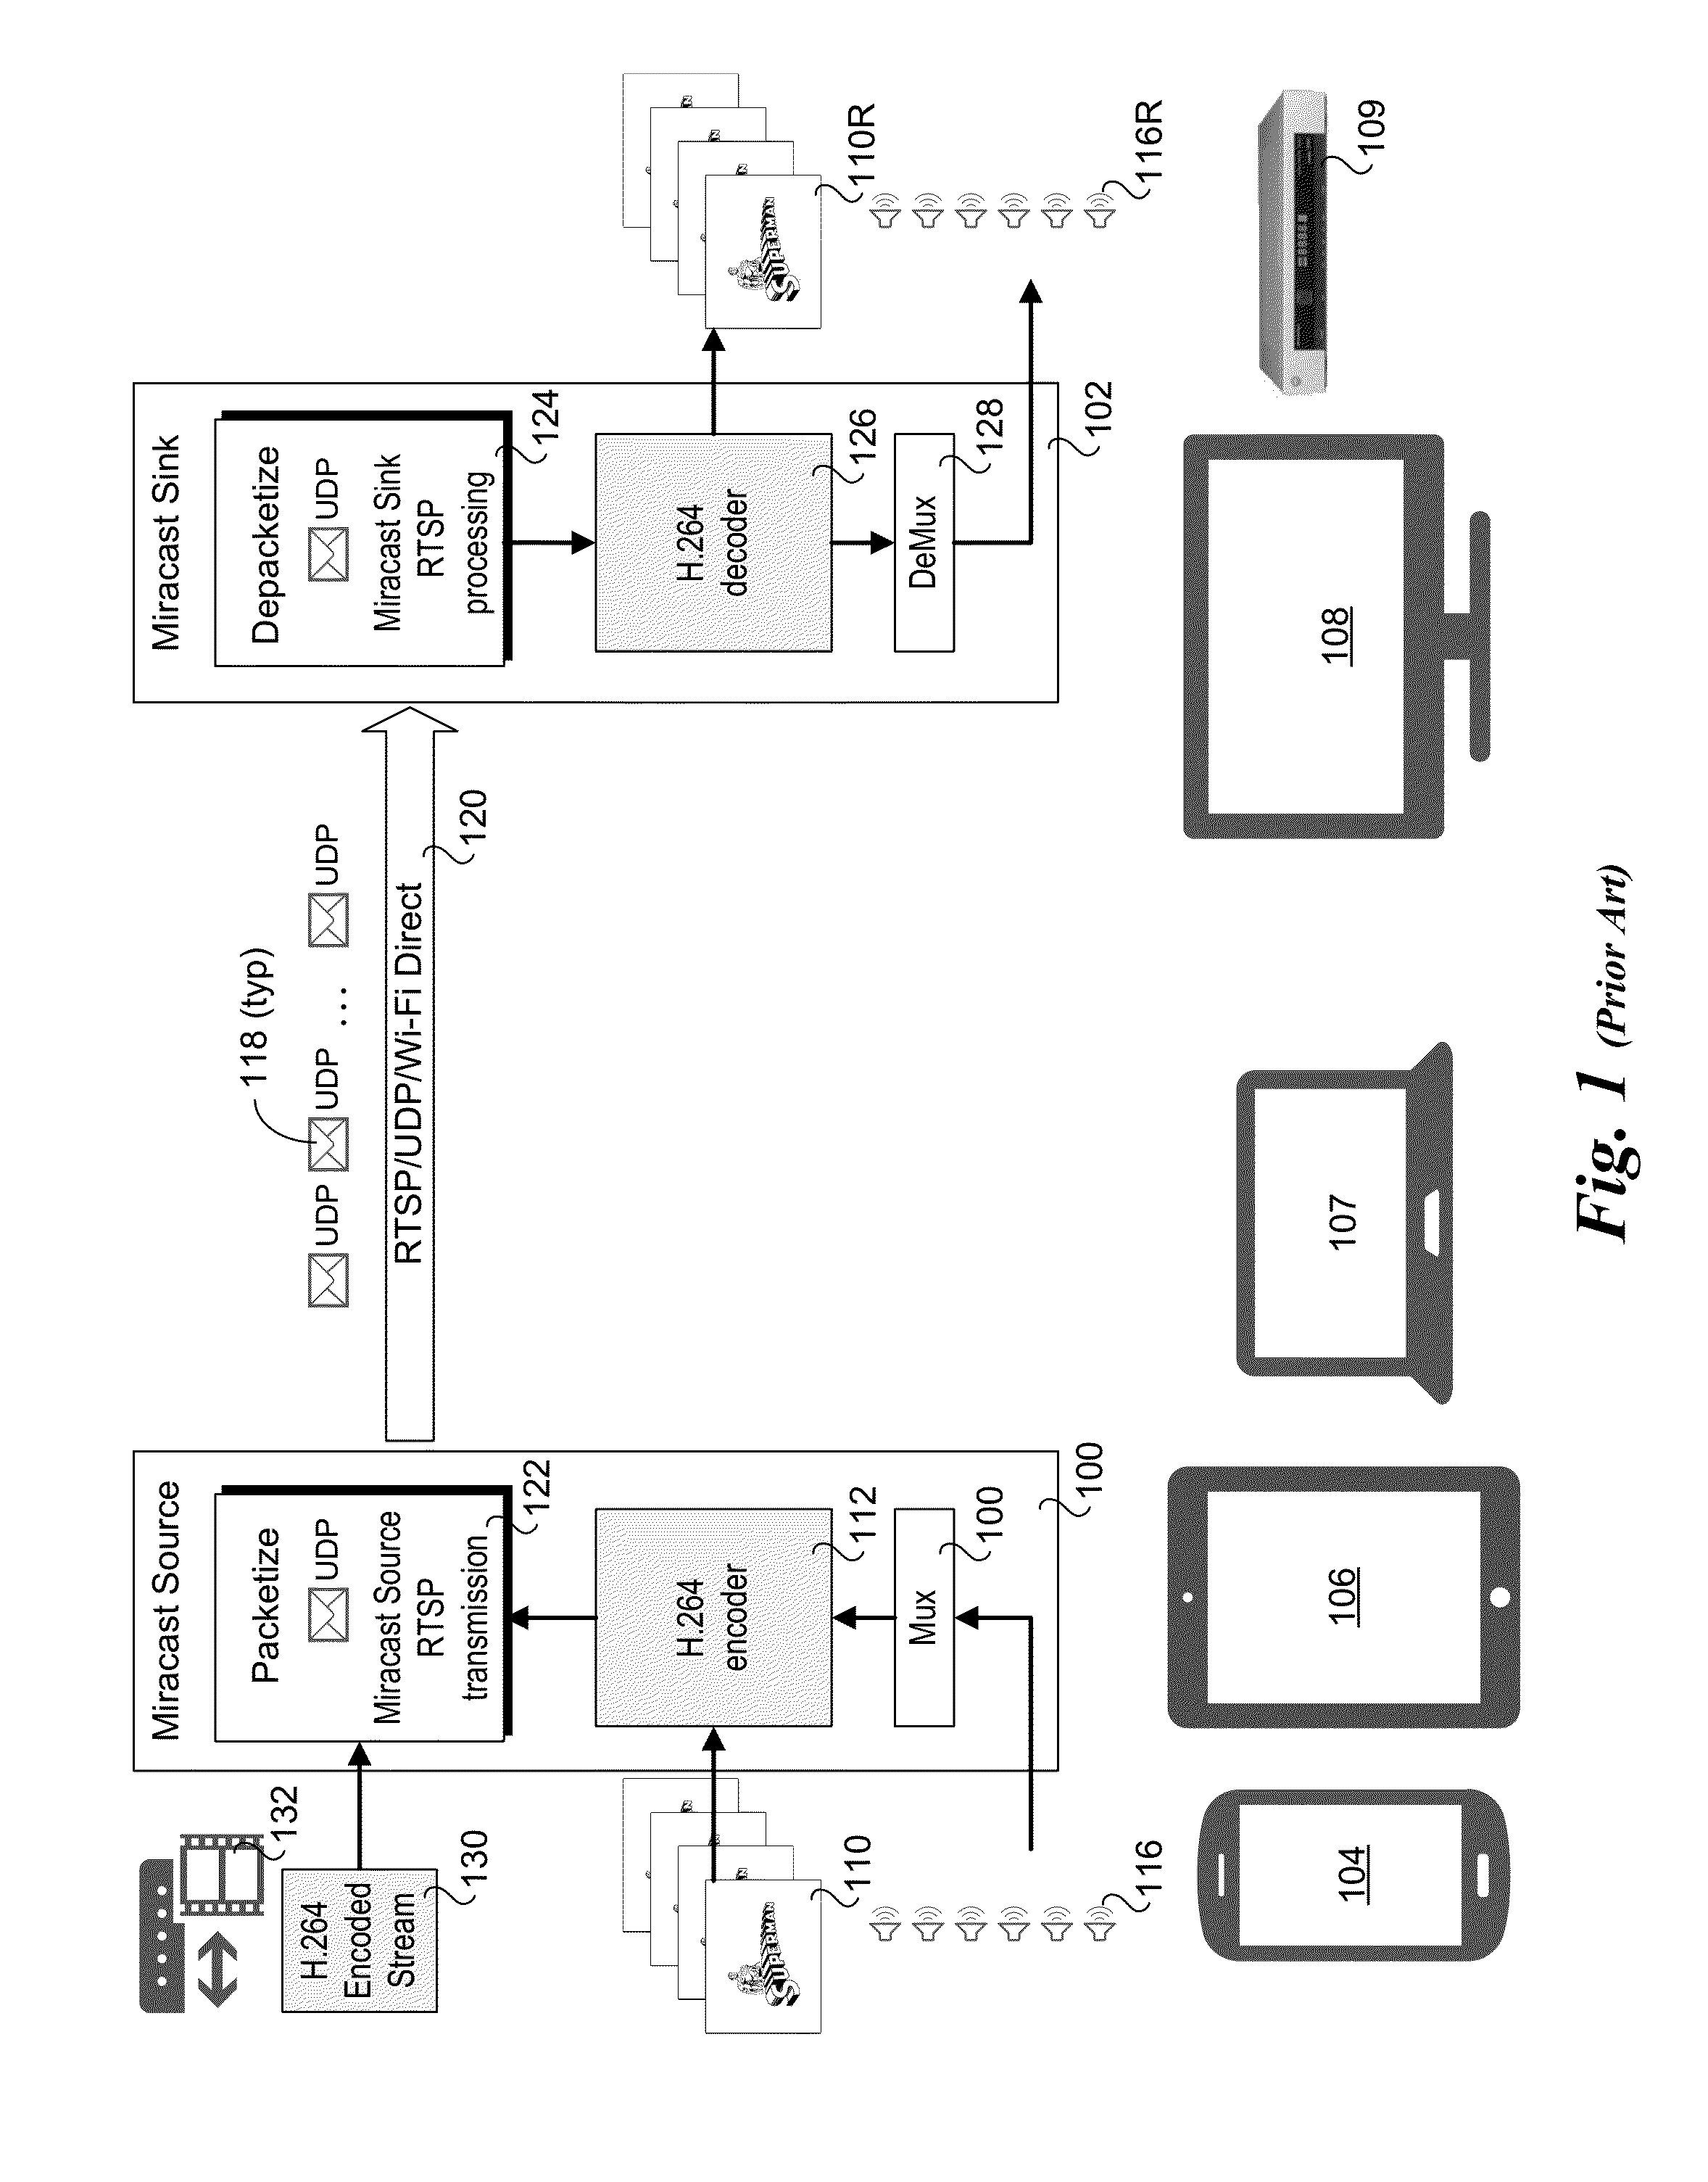 Mode-switch protocol and mechanism for hybrid wireless display system with screencasting and native graphics throwing